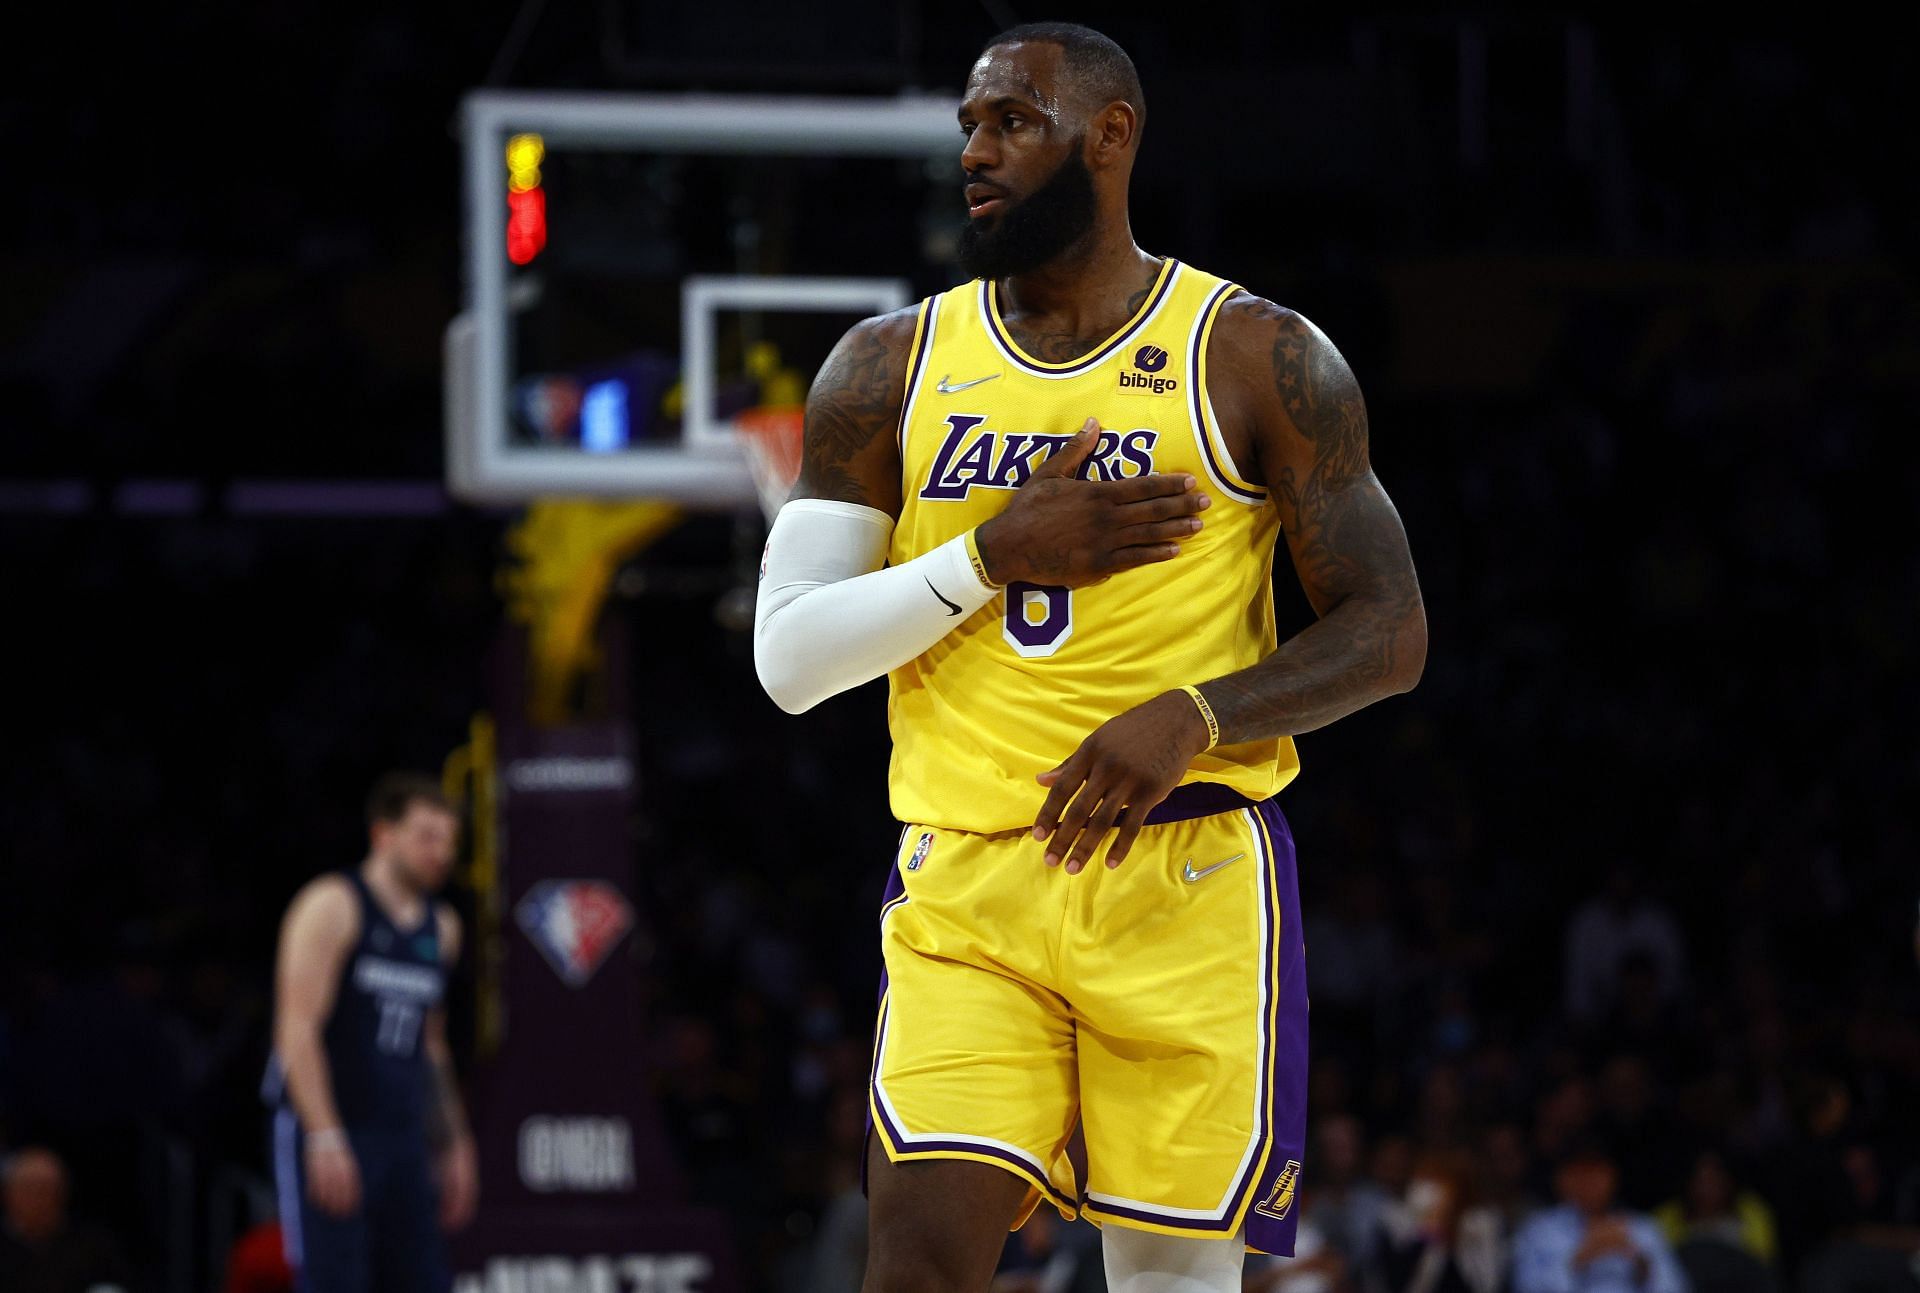 LeBron James says he does not want the game to end when he&#039;s in the zone